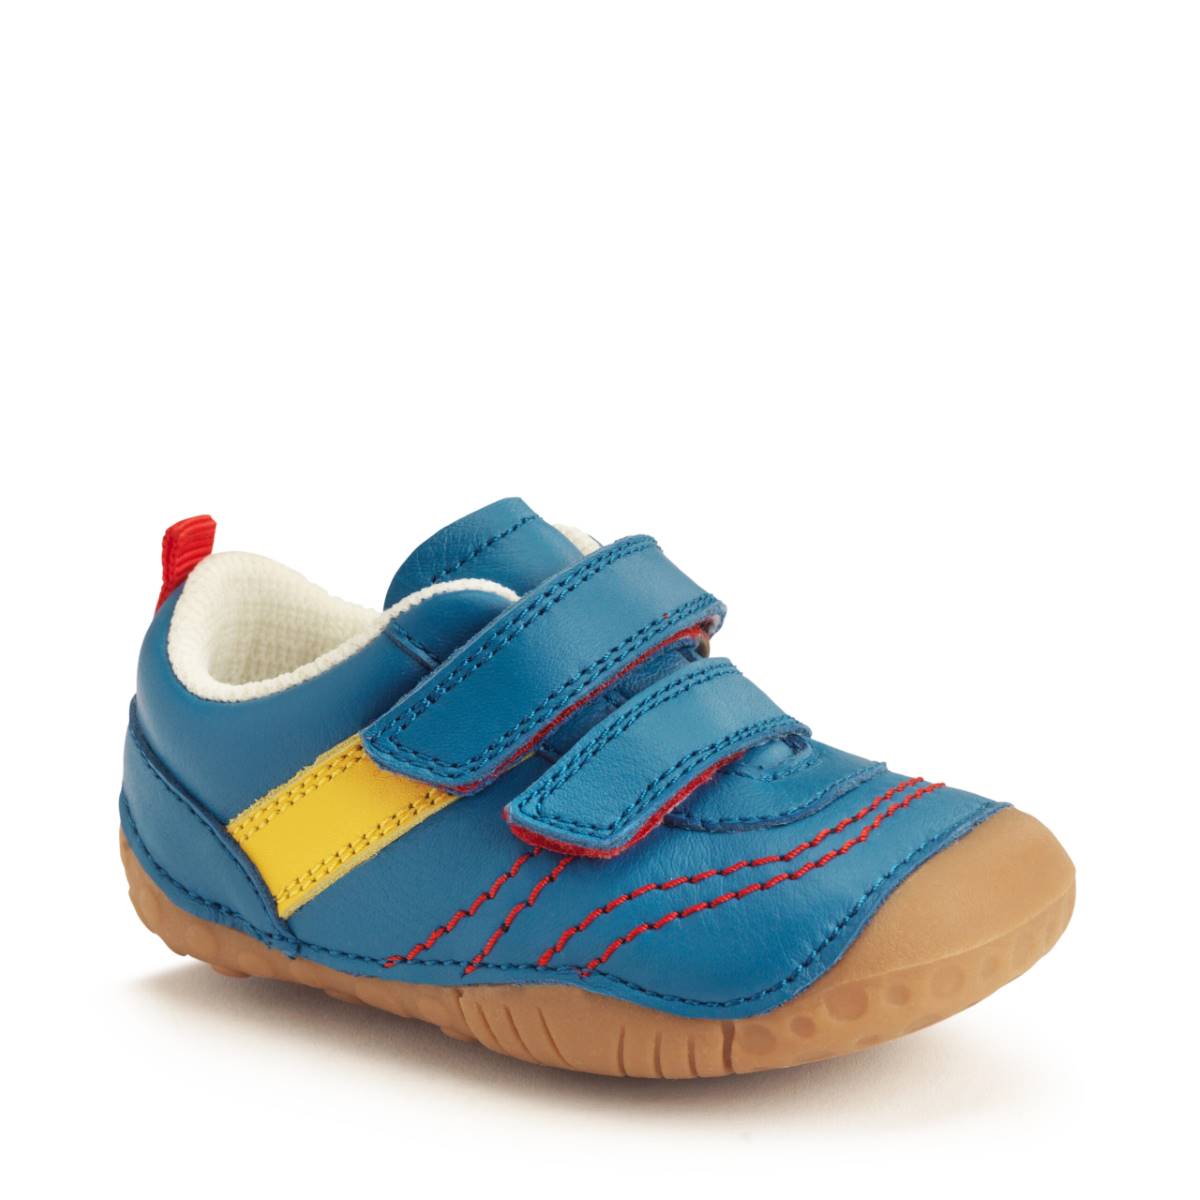 Start Rite Little Smile 2v BLUE LEATHER Kids Boys First Shoes 0823-26F in a Plain Leather in Size 4